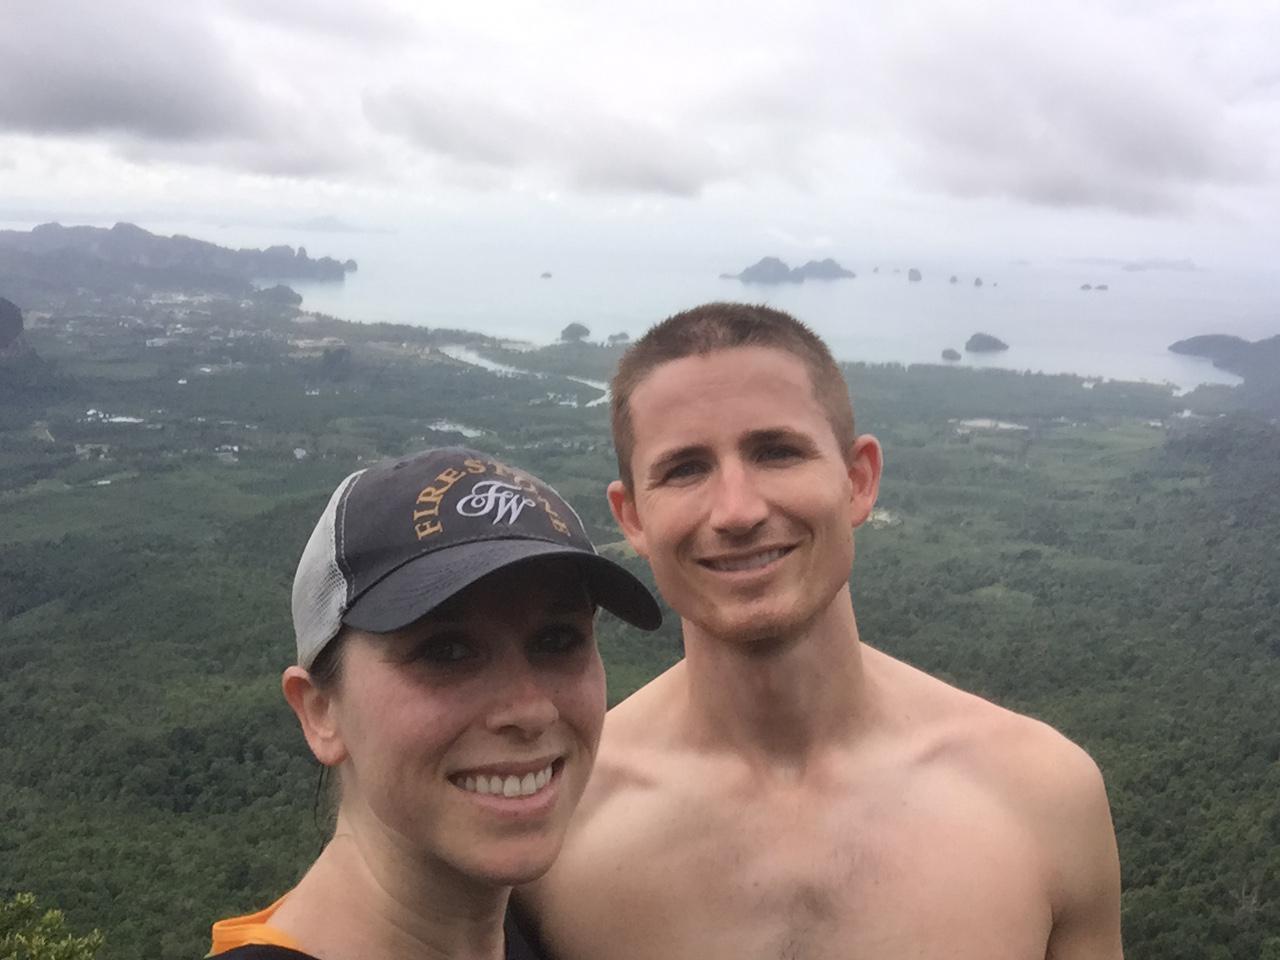 Feeling on top of the world in Thailand